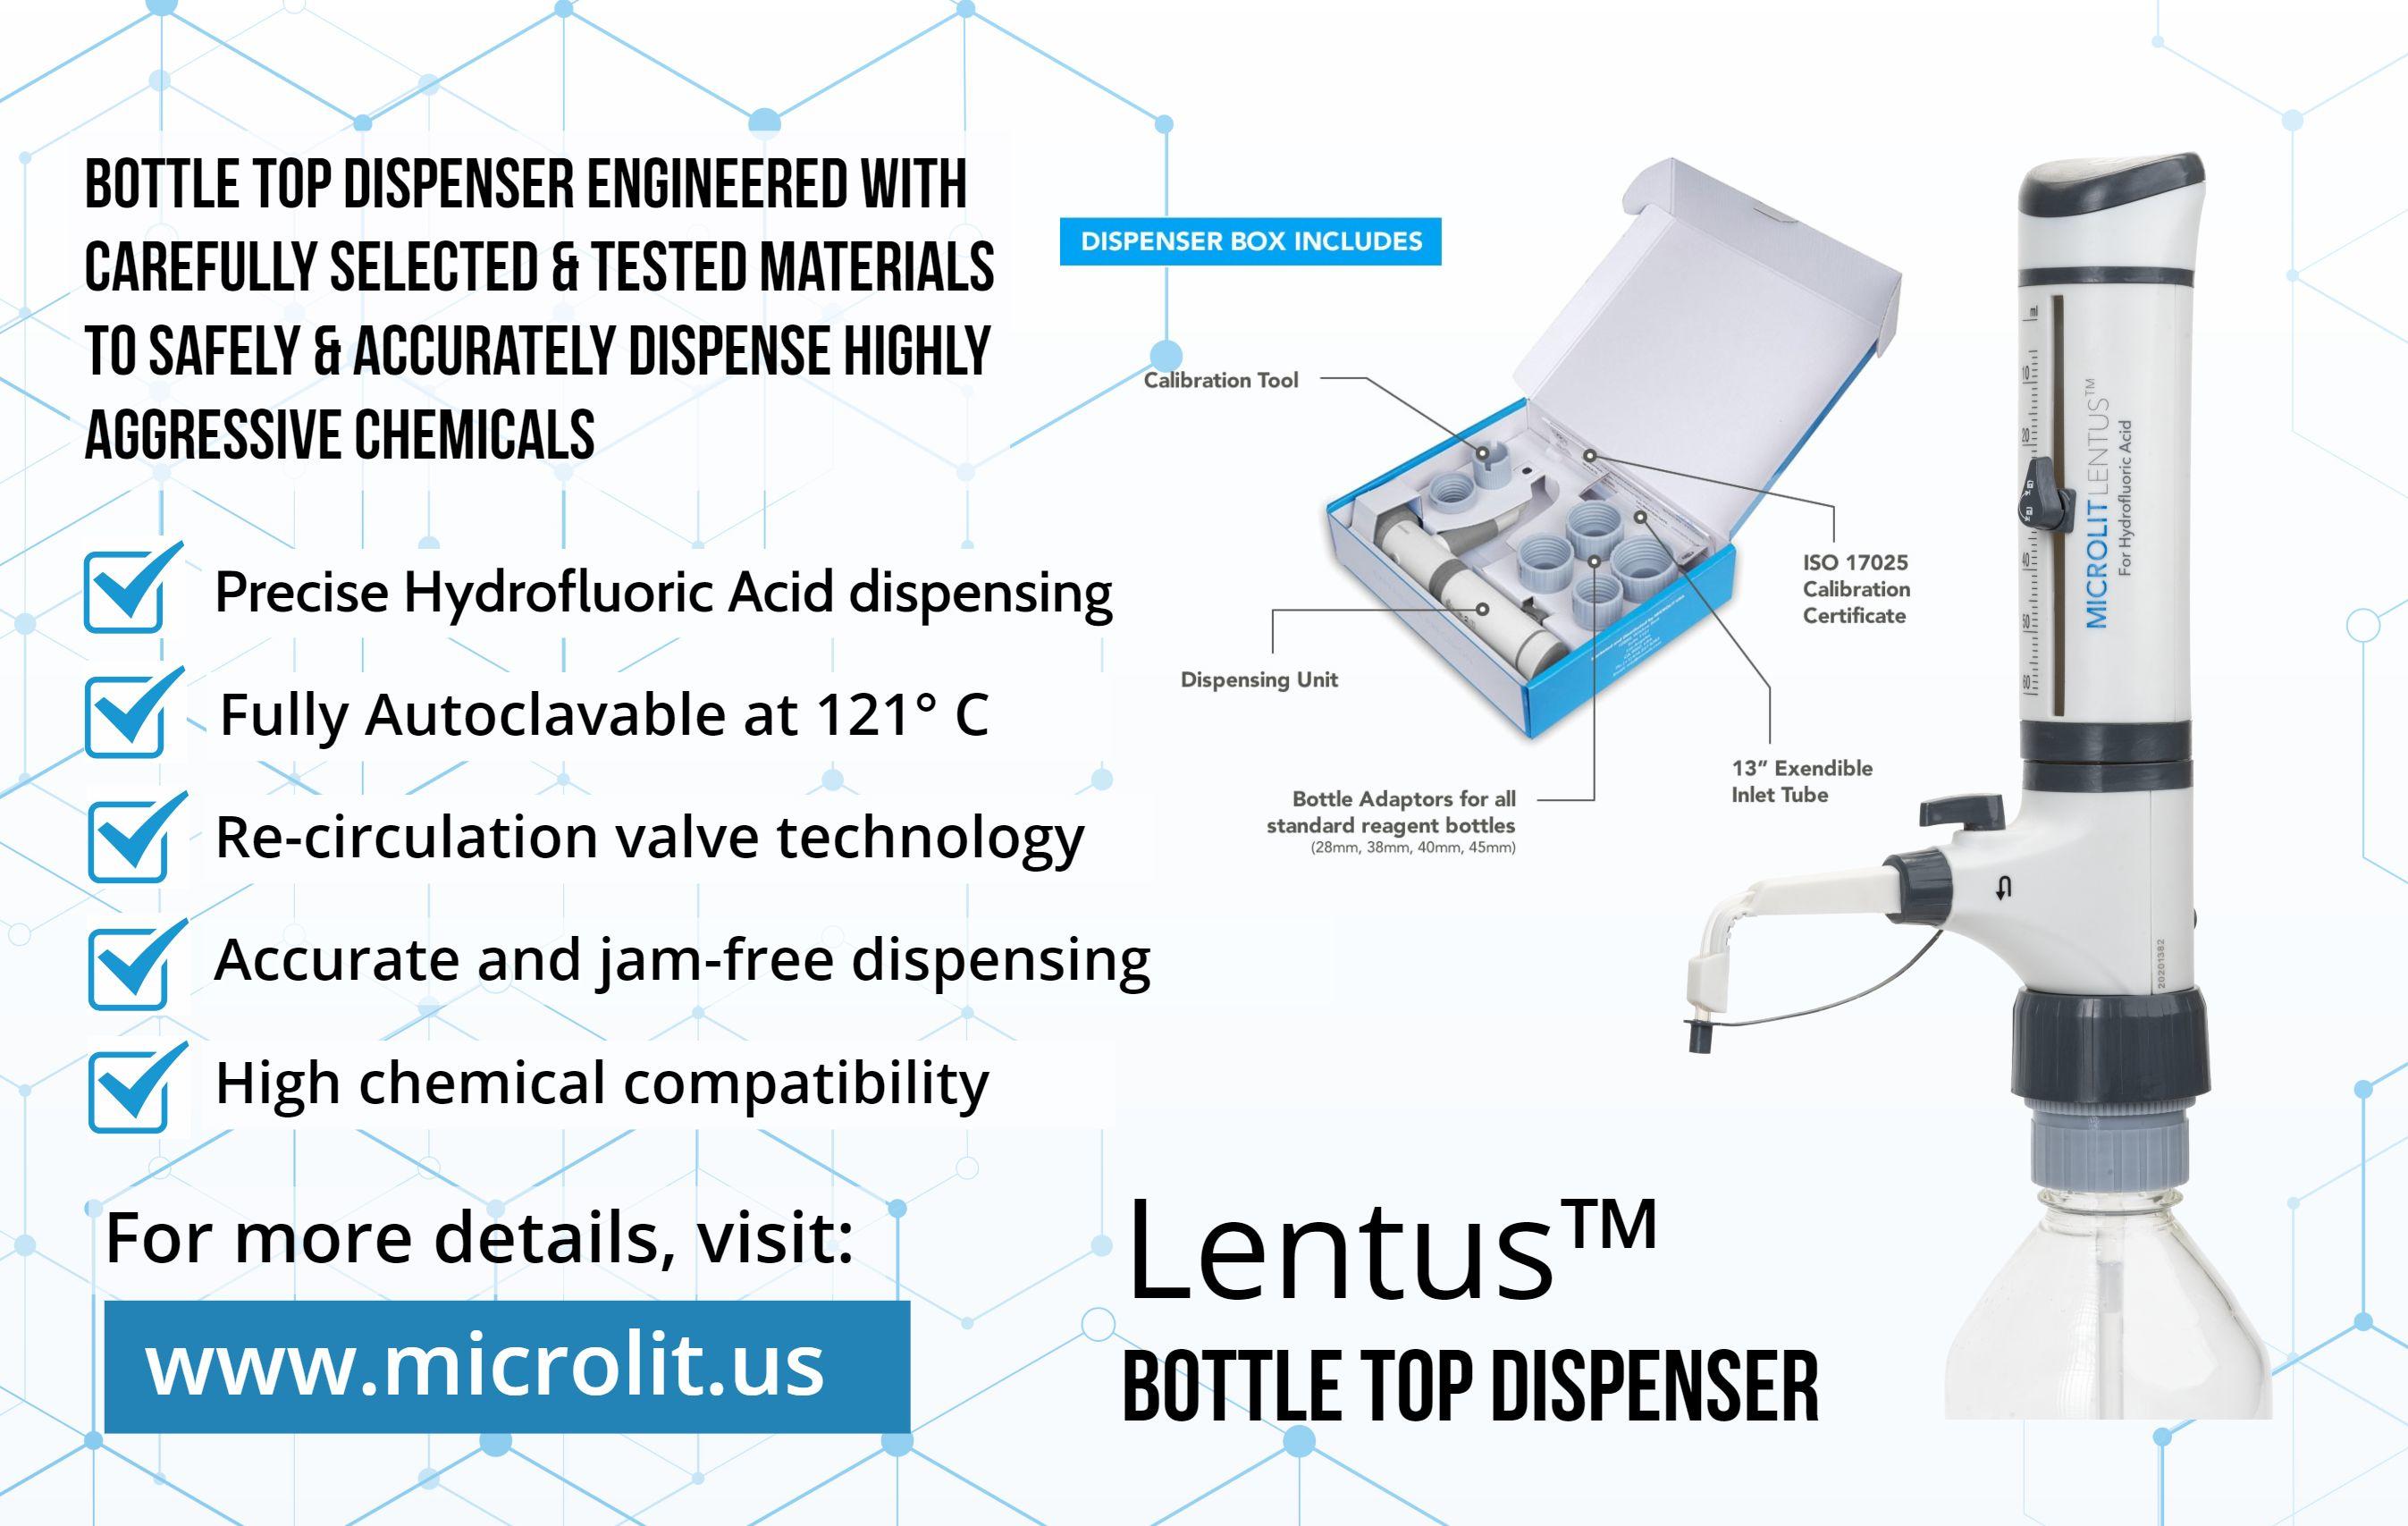 Image - Microlit offers the world class #BottleTopDispenser engineered with carefully selected & tested materials to ...